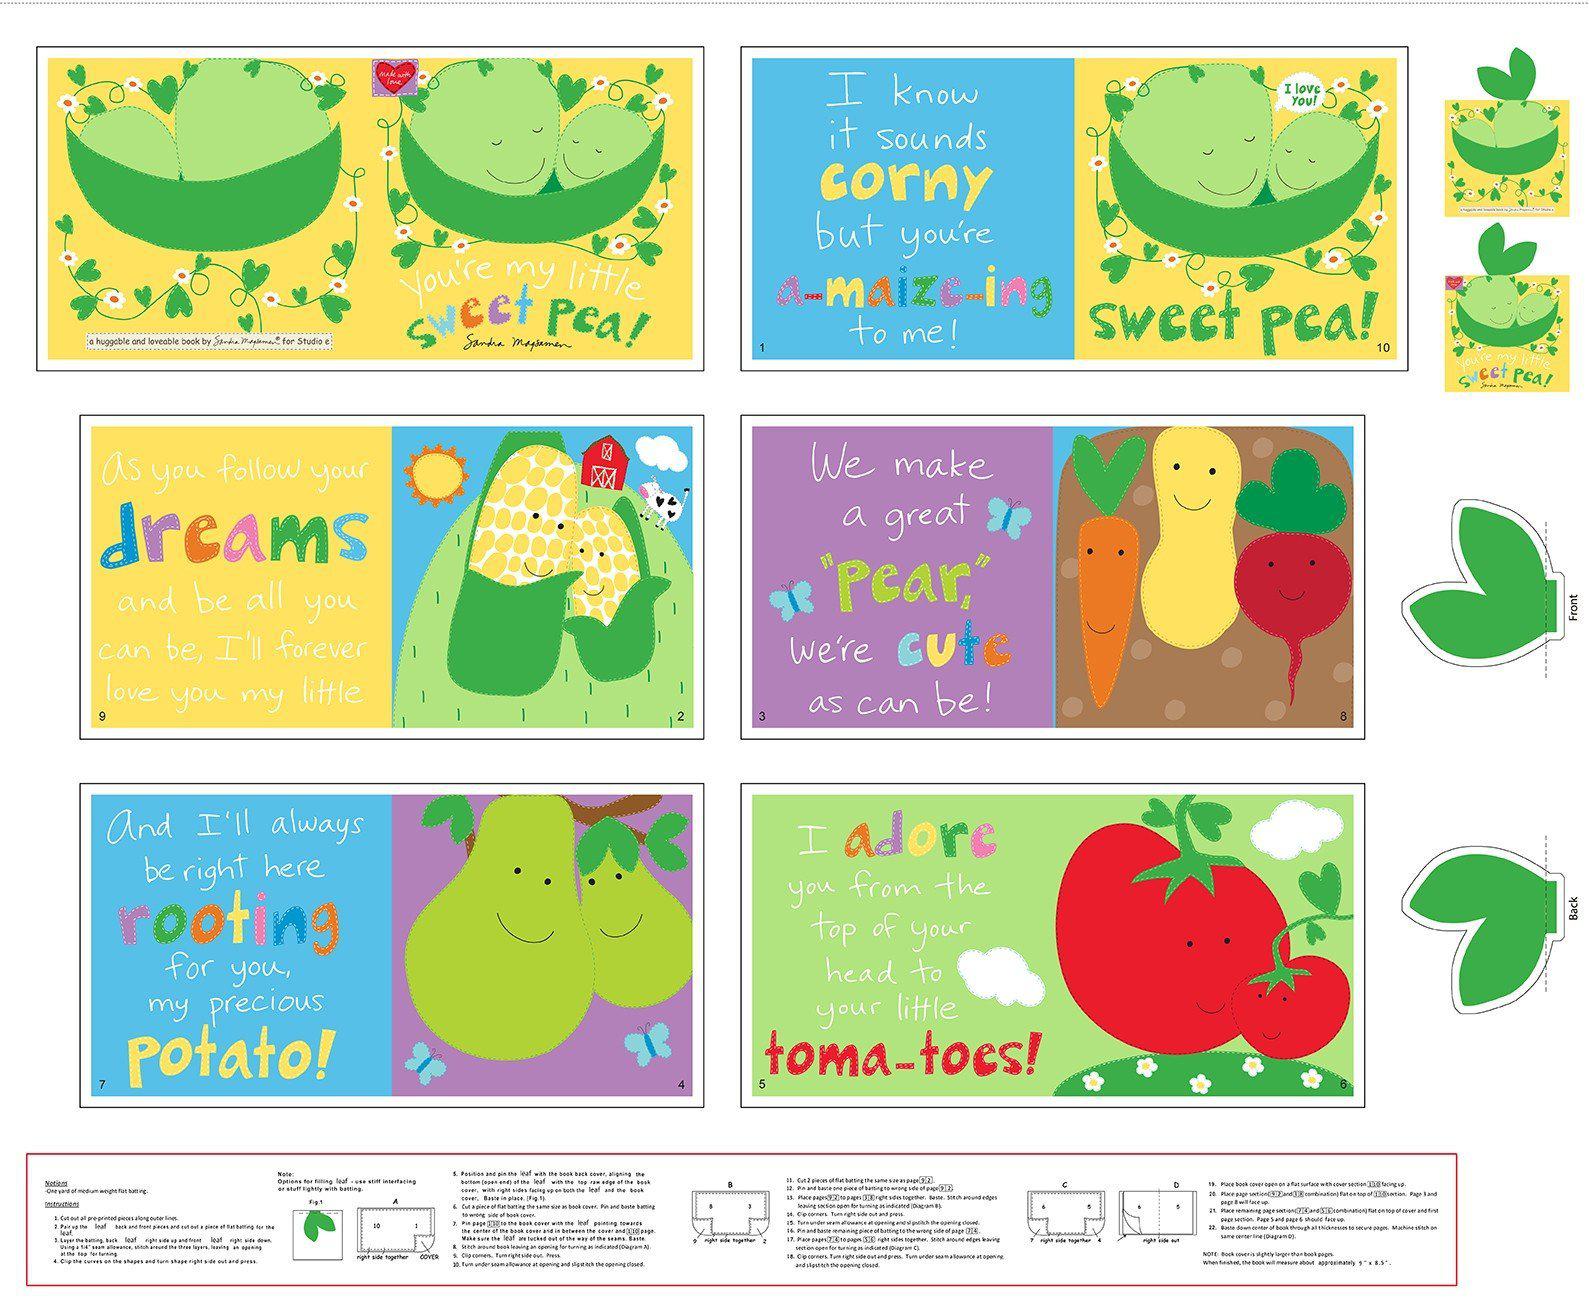 Huggable & Loveable XI You're My Little Sweet Pea Panel 36"x 44/45"-Studio e Fabrics-My Favorite Quilt Store